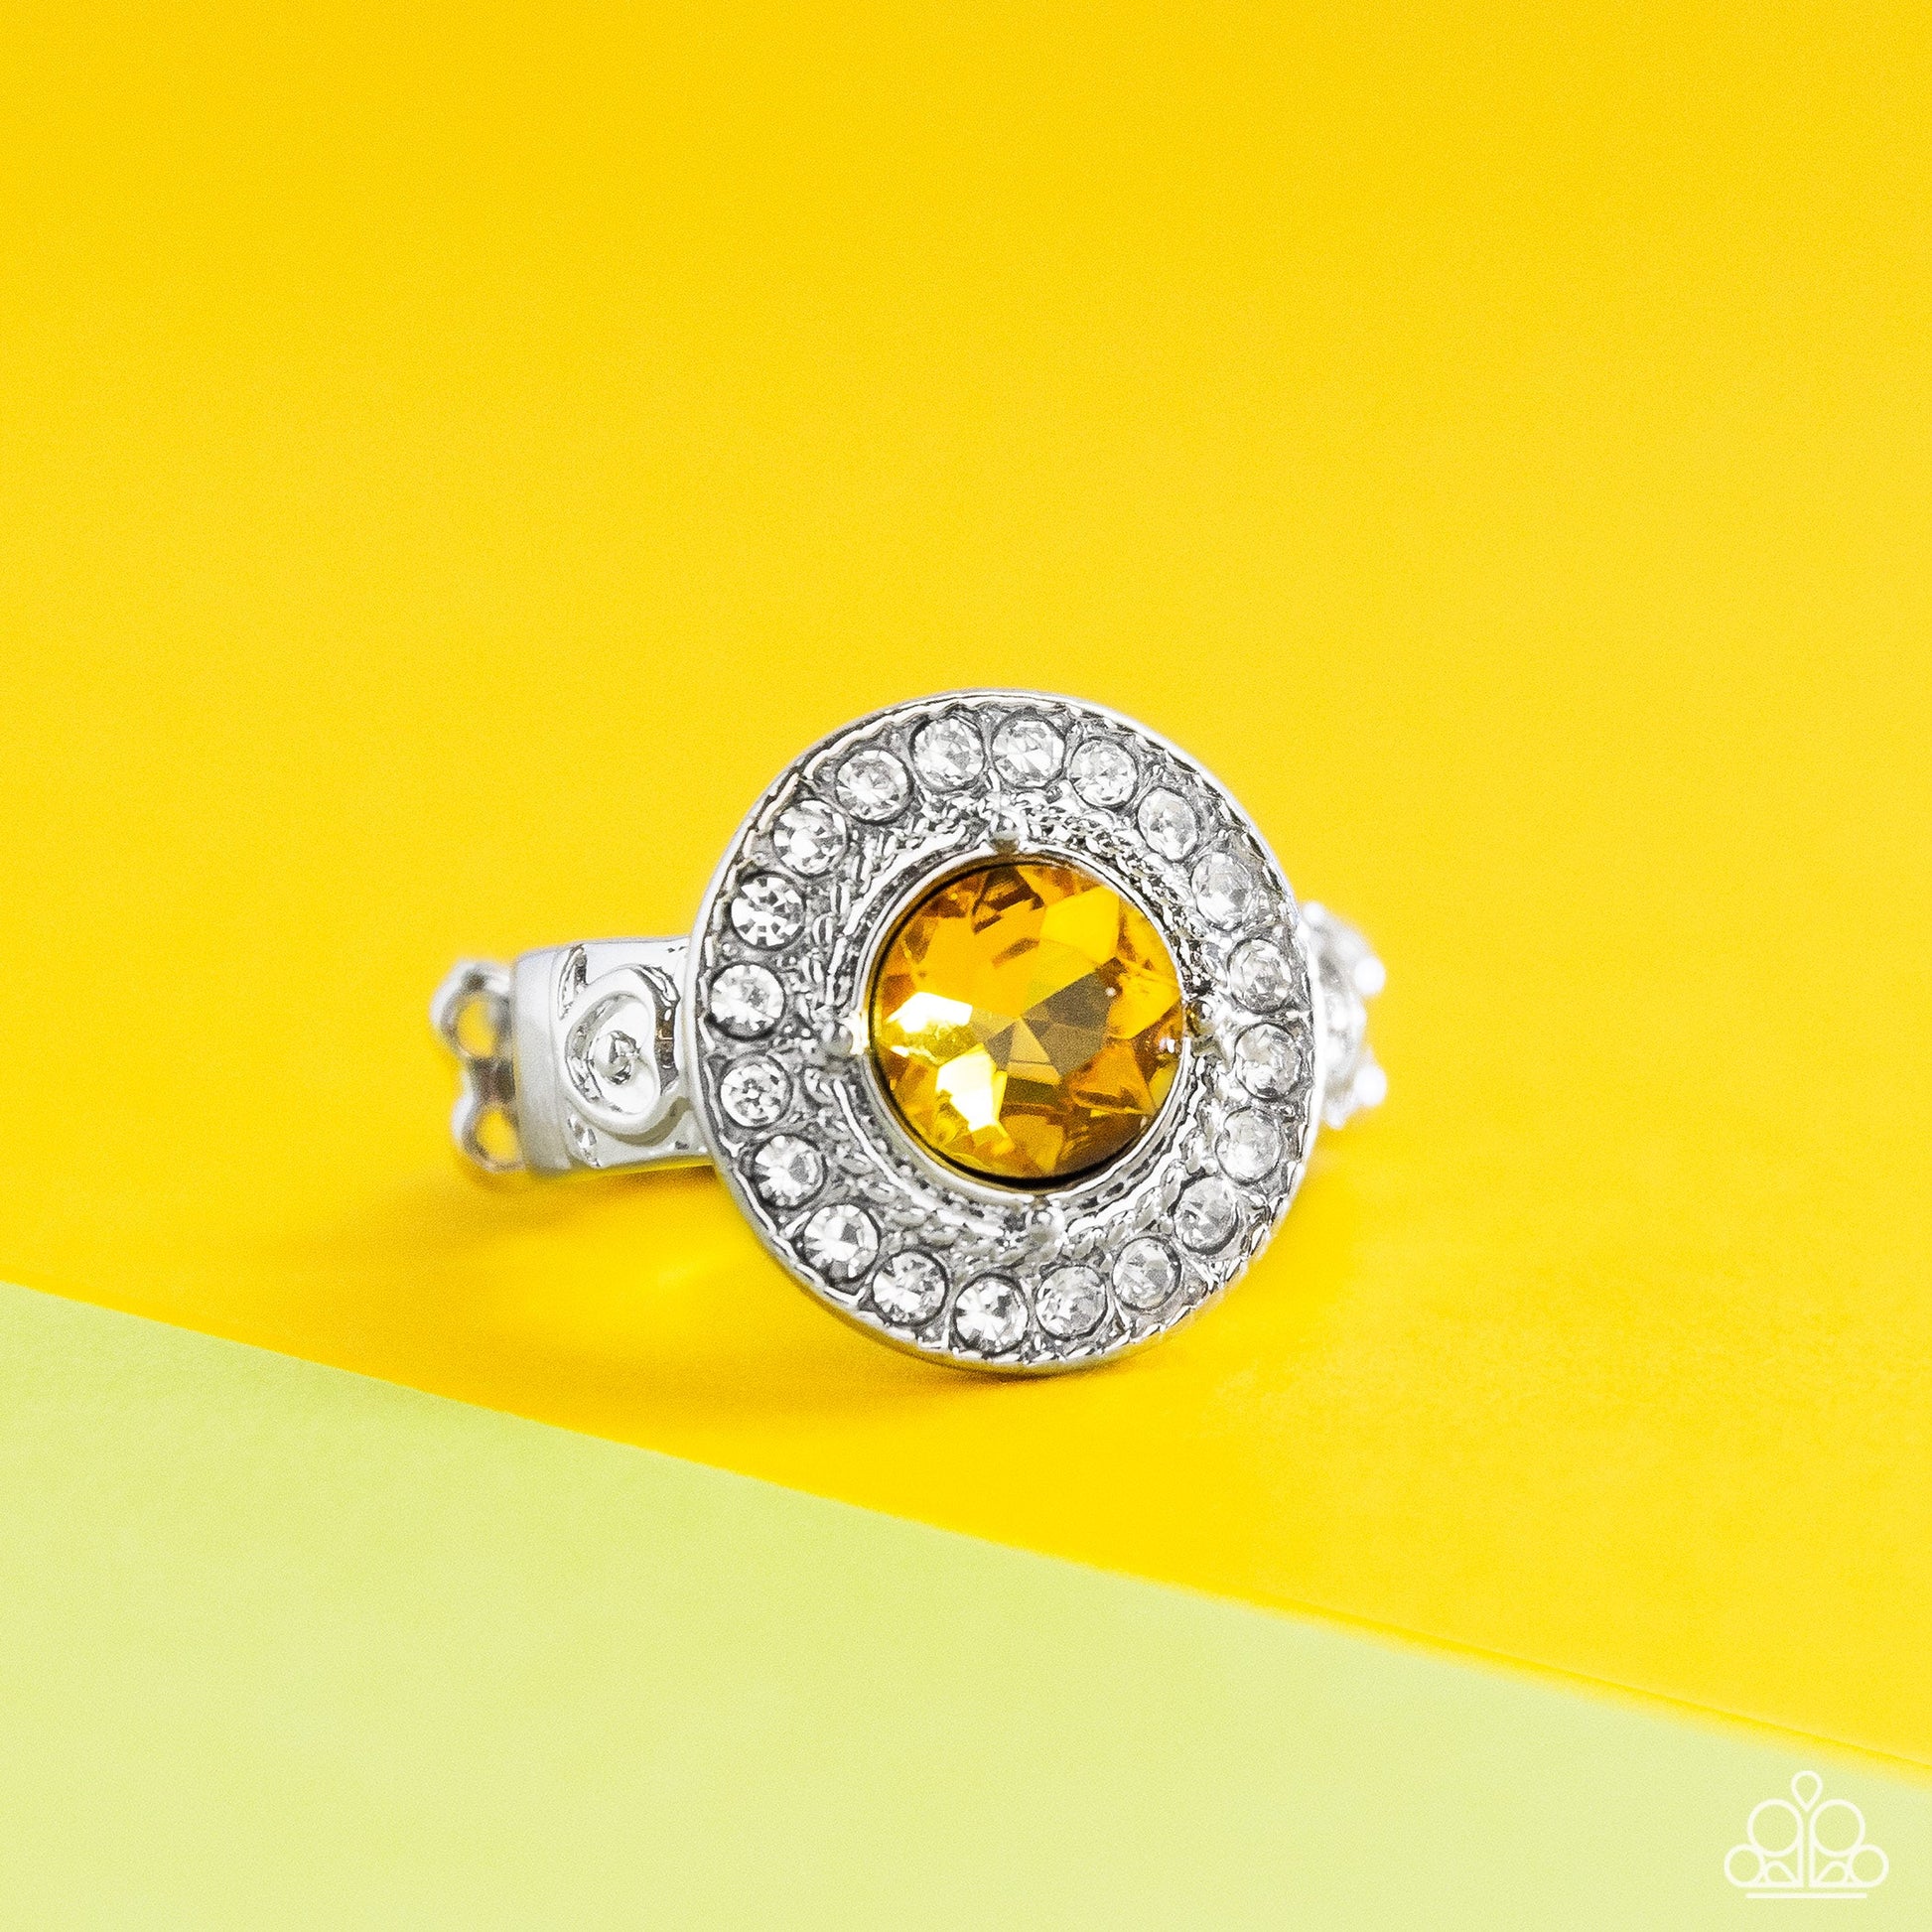 Targeted Timelessness - Yellow and Silver Ring - Paparazzi Accessories - Featuring a pronged silver fitting, an oversized yellow gem sits atop a radiant ring of glassy white rhinestones for a timeless fashion.